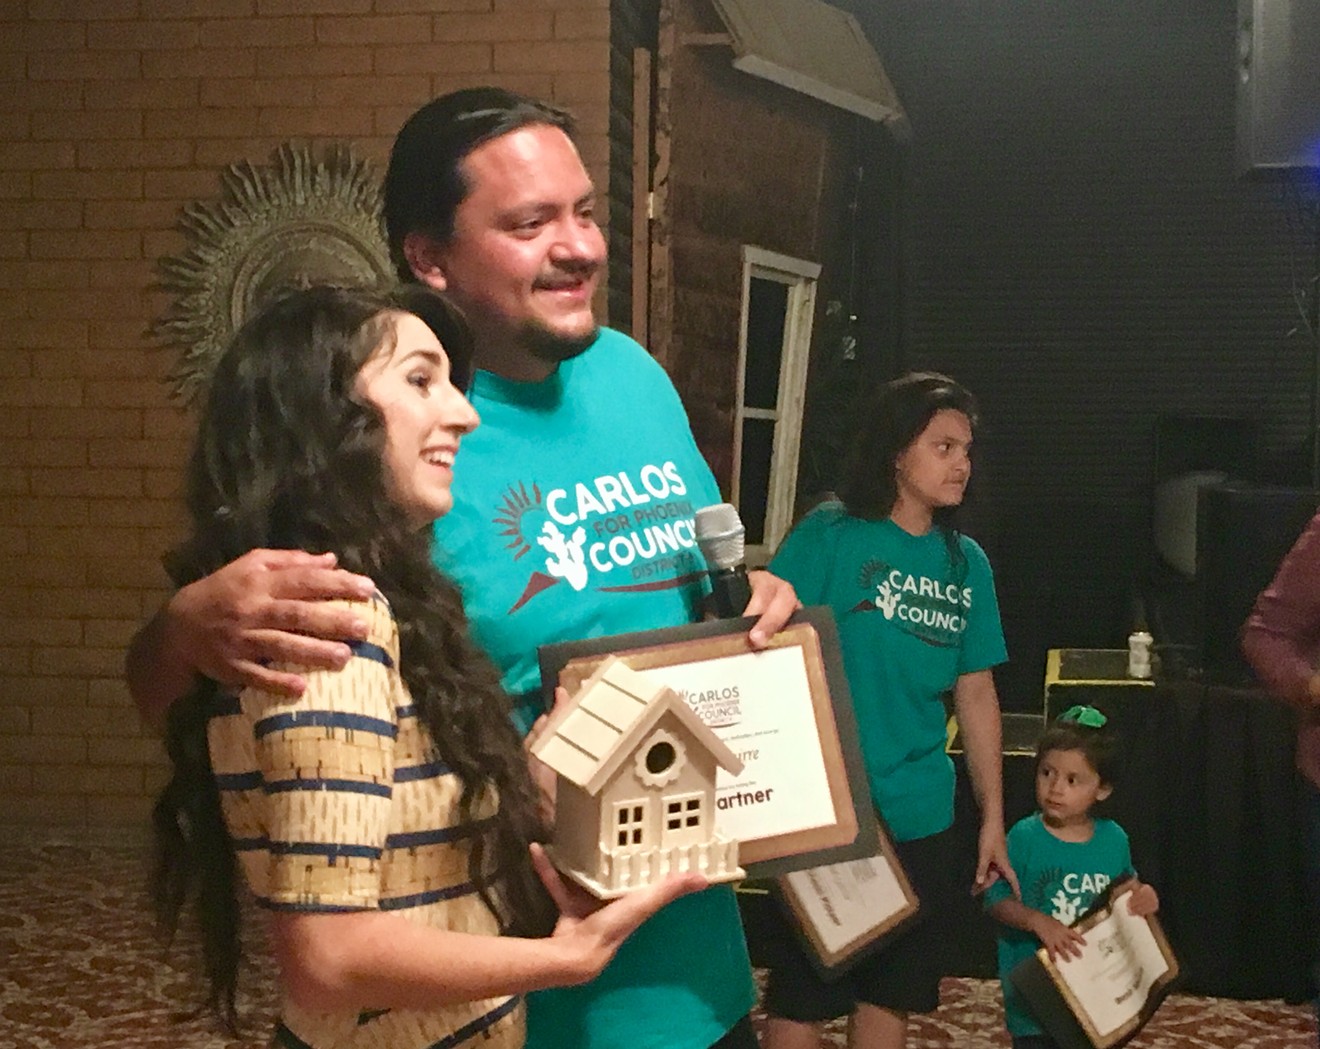 Carlos Garcia with his wife, Alexis, at his election night watch party on May 21, 2019.